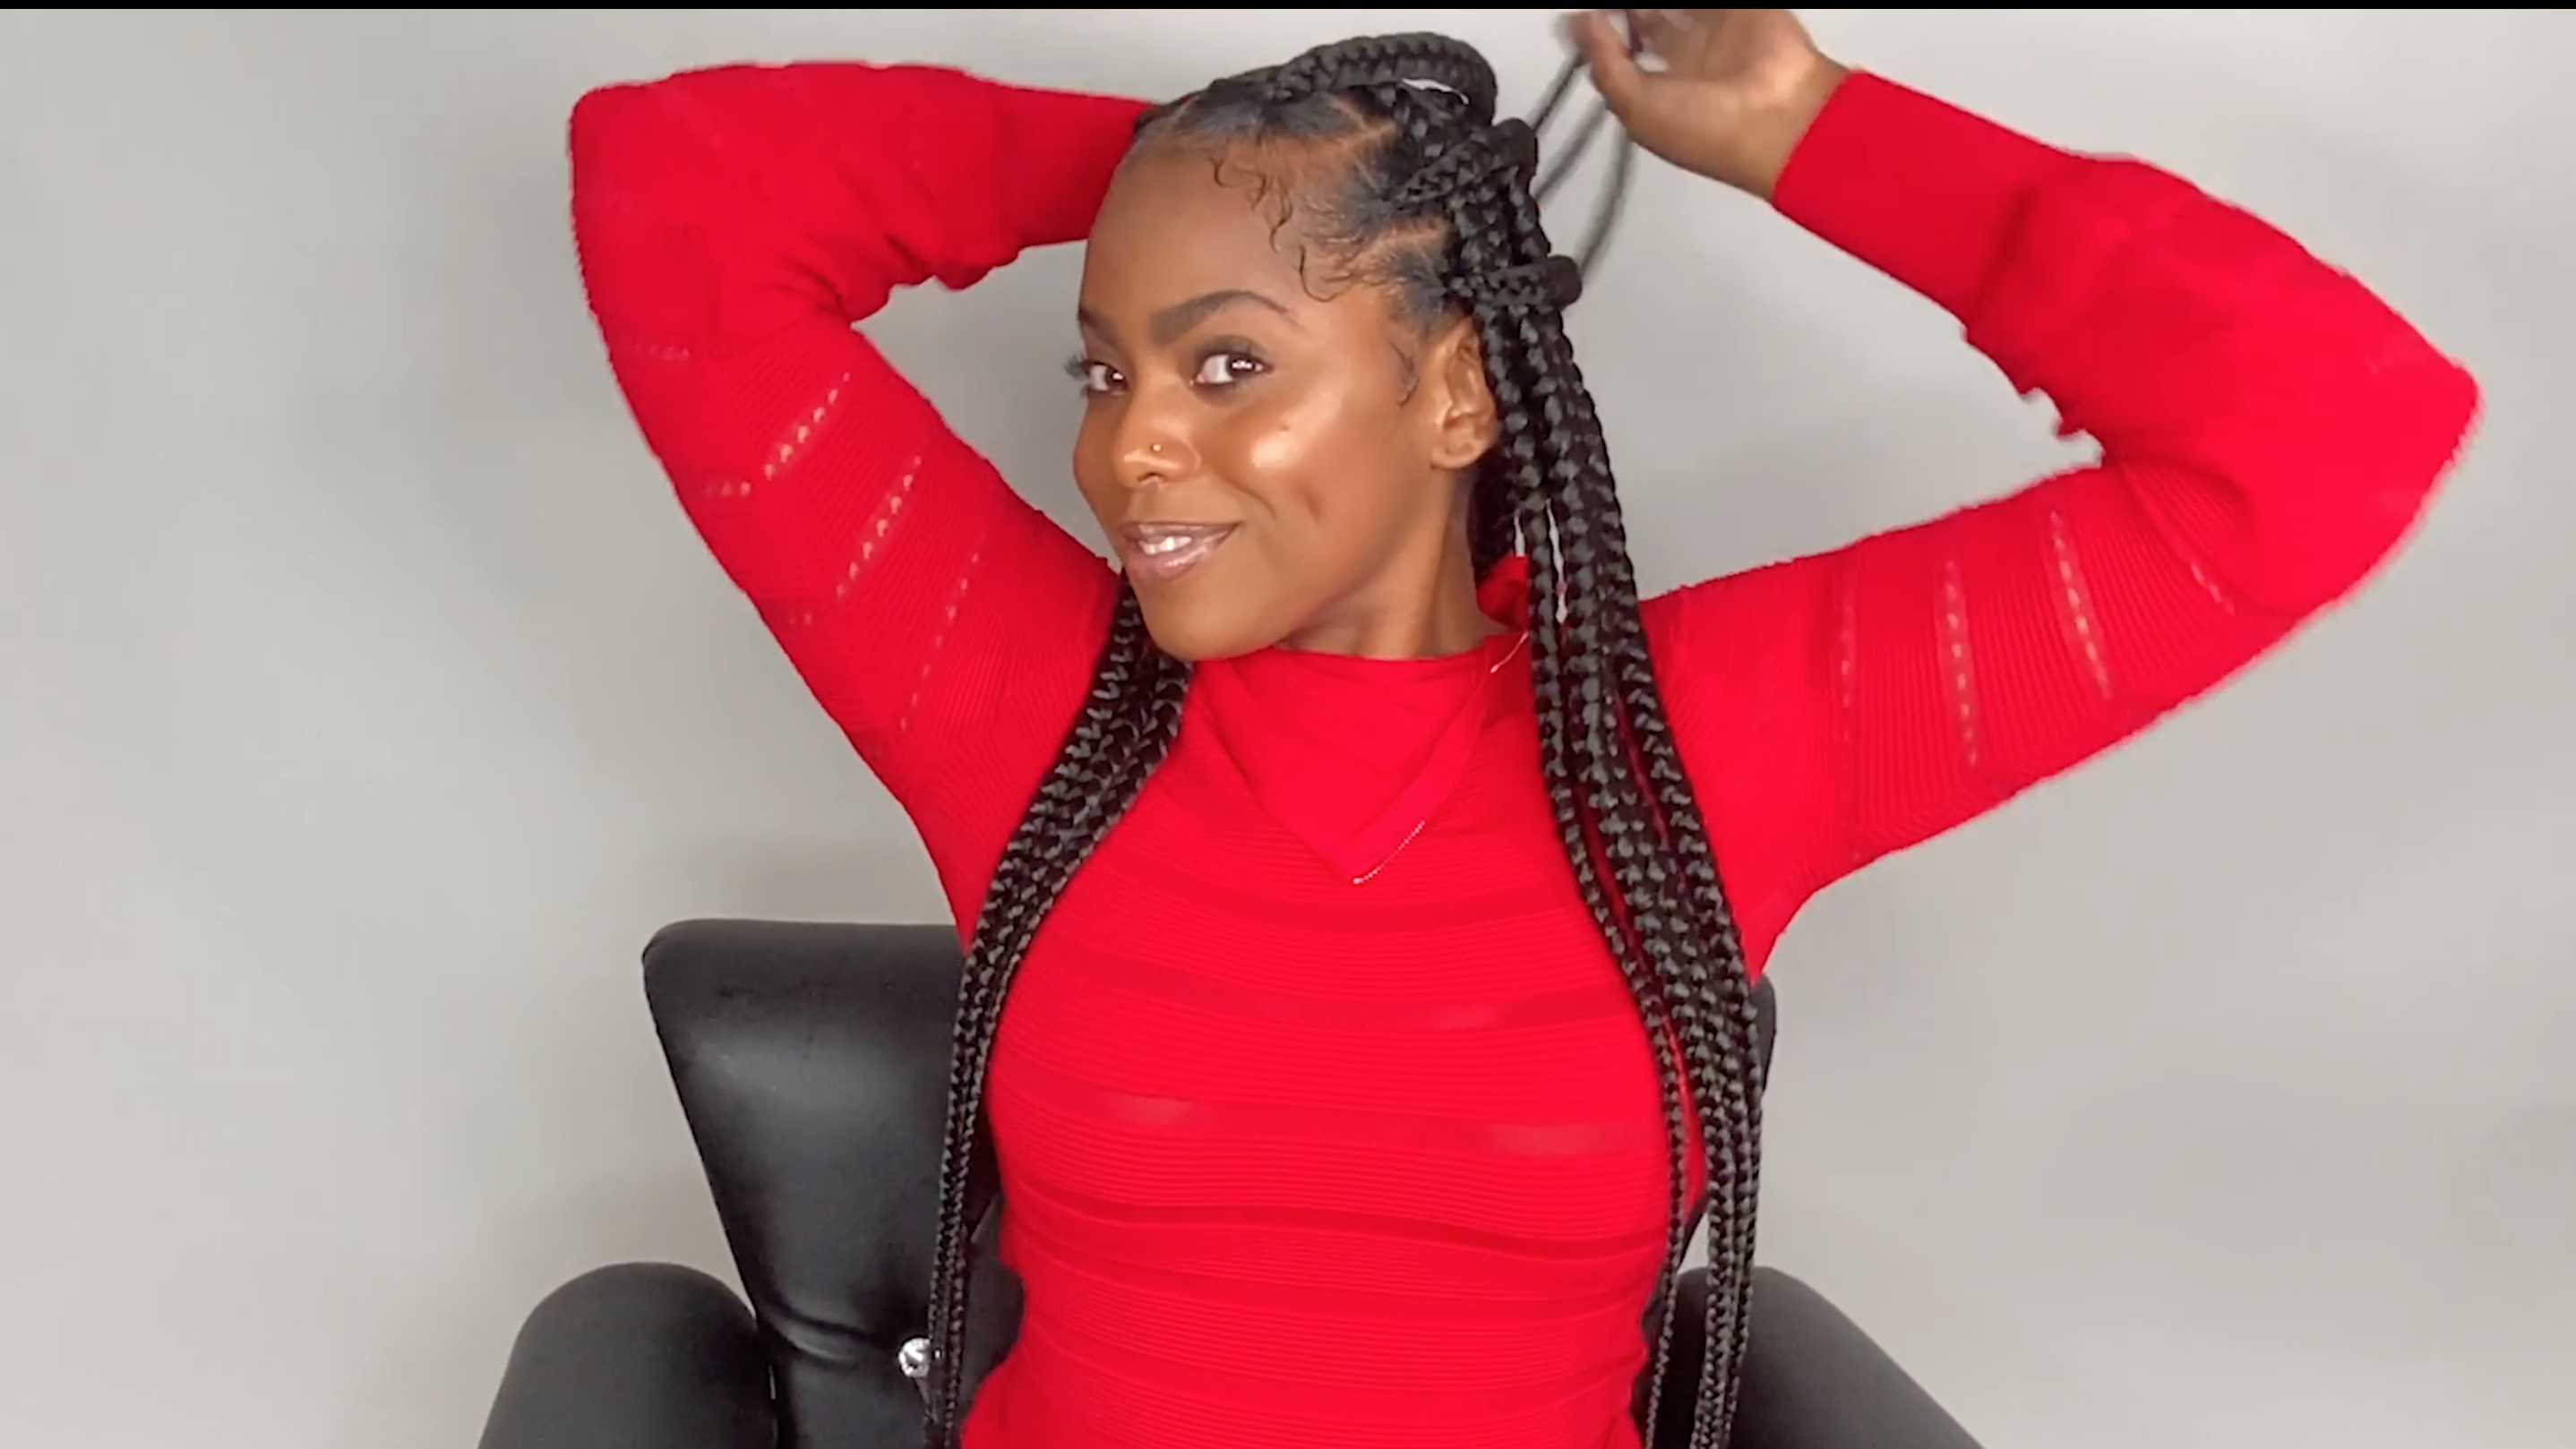 Jumbo Knotless Box Braids Tutorial for 2022 - Cosmo's The Braid Up